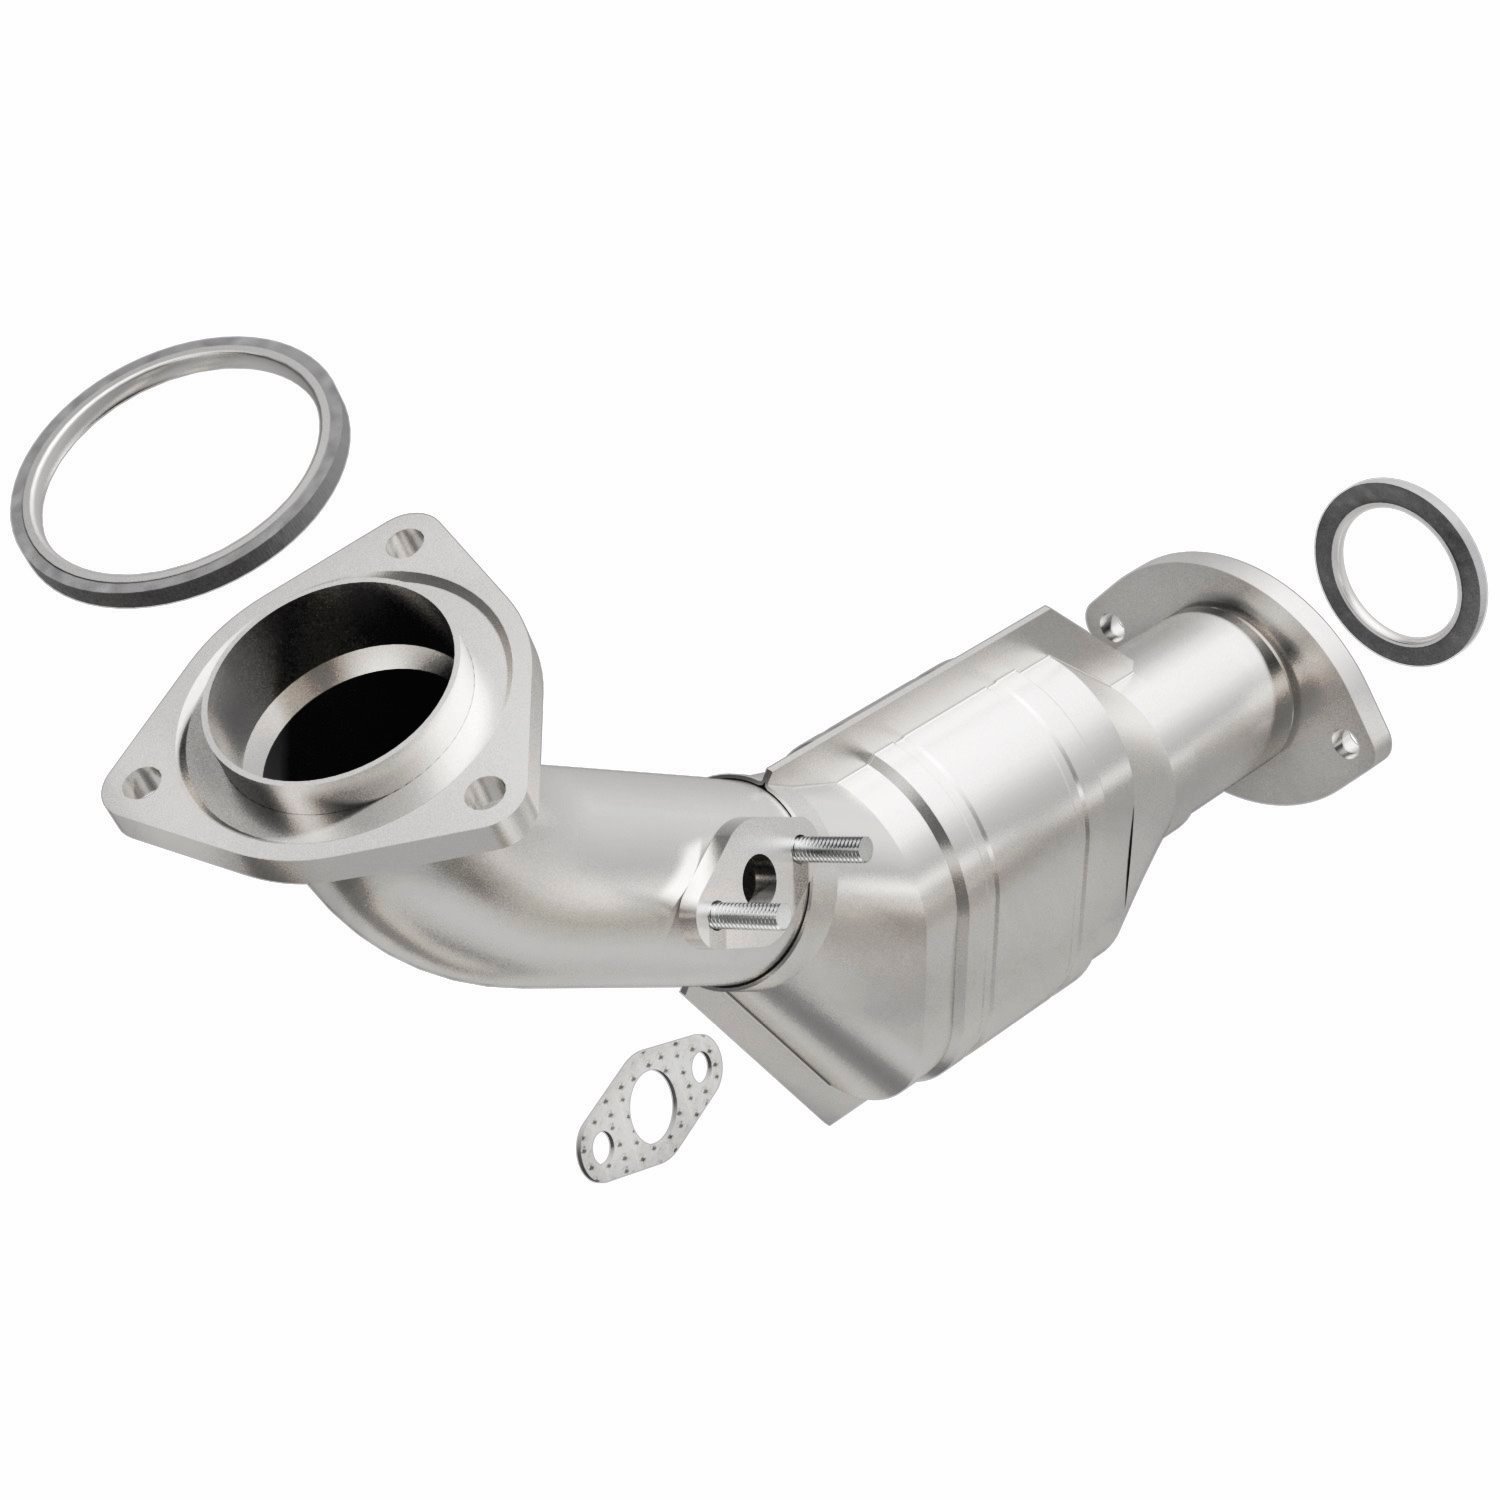 Direct-Fit Catalytic Converter 2000-2004 Toyota Tacoma/Tundra 3.4L V6 2/4WD